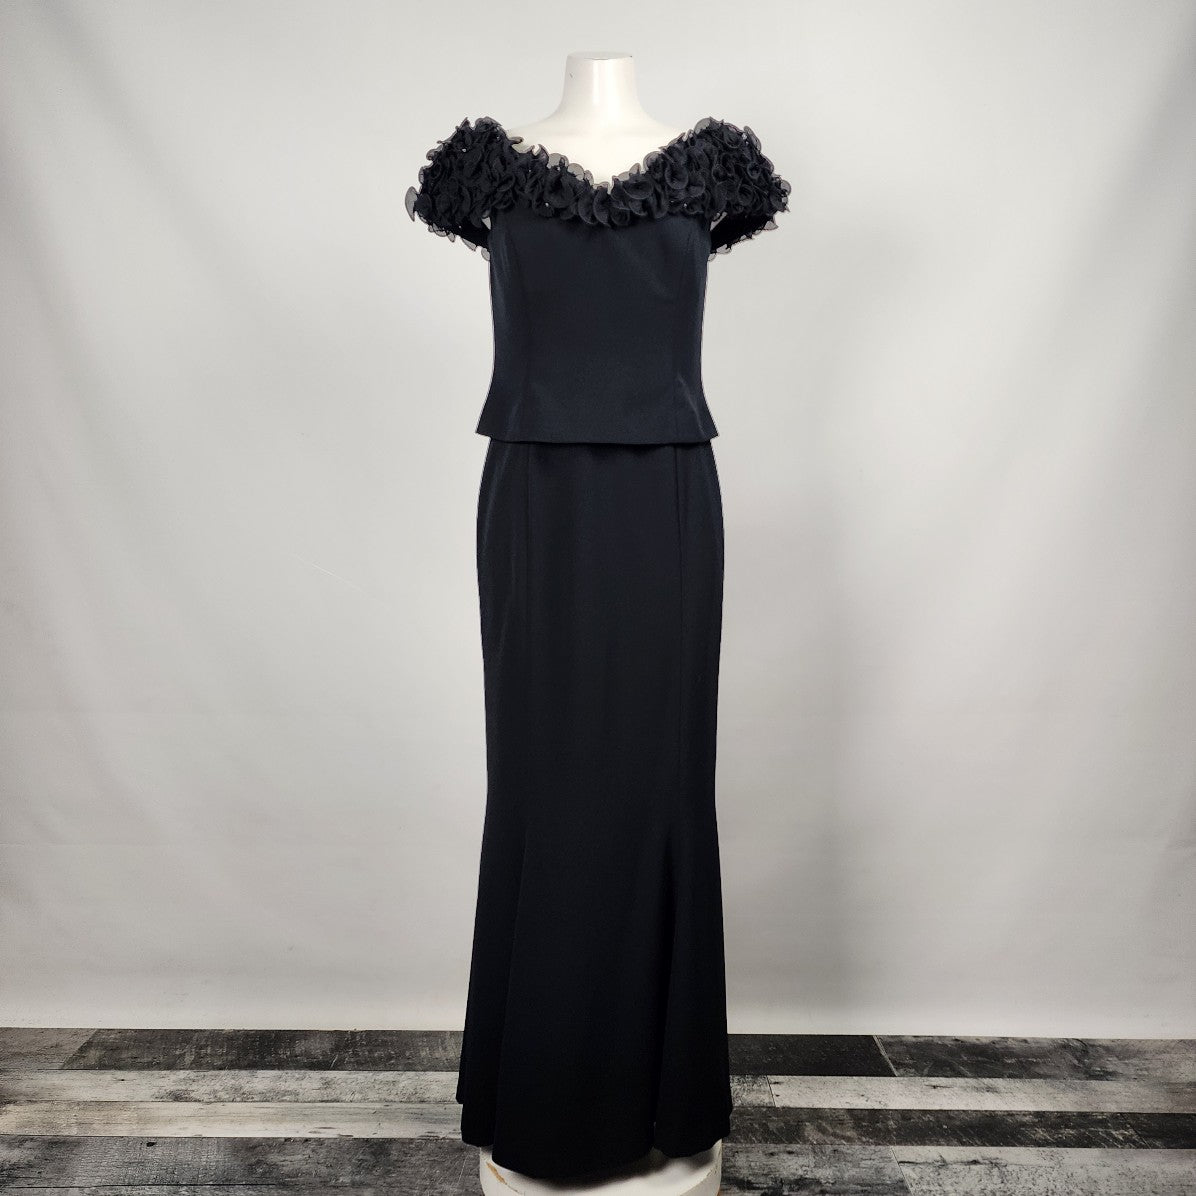 Day Mor Couture Black Ruffle Off Shoulder Evening Gown Event Dress Size 8